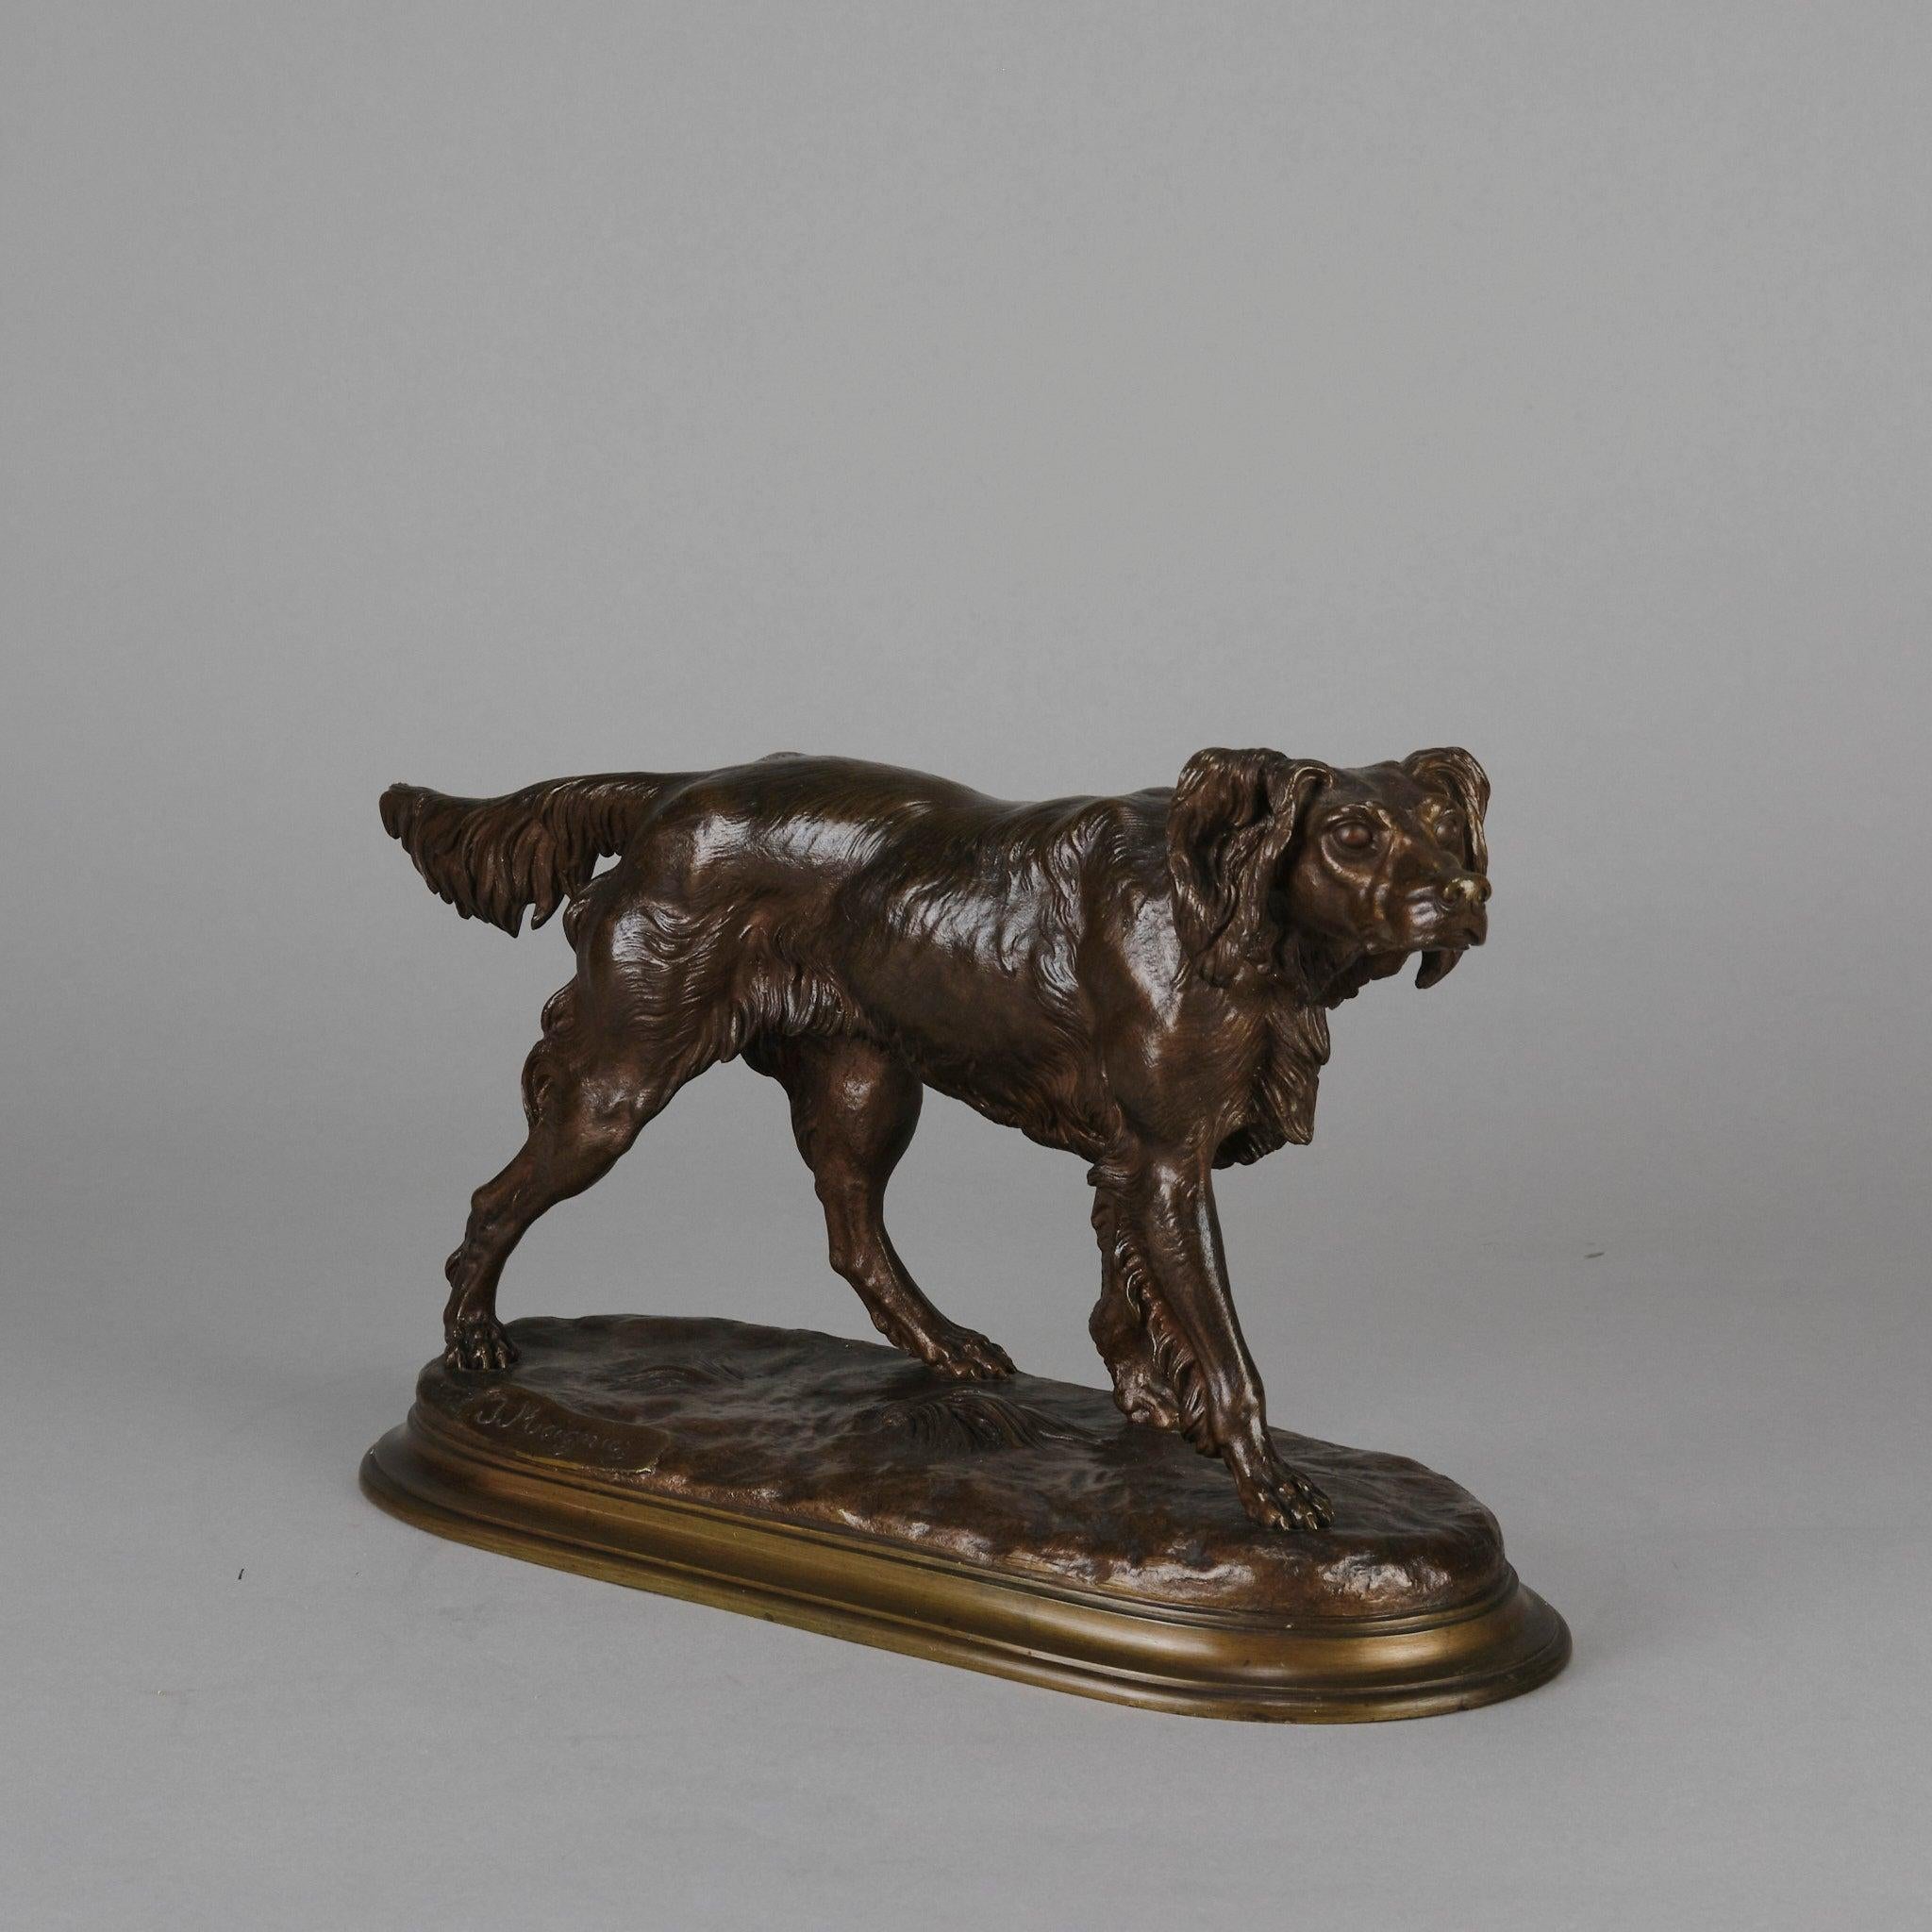 Very fine mid-19th century French Animalier bronze study of a standing Setter with excellent hand chased surface detail and rich brown patination. Raised on a stepped naturalistic base, signed J Moigniez.
Additional information:

Height: 19